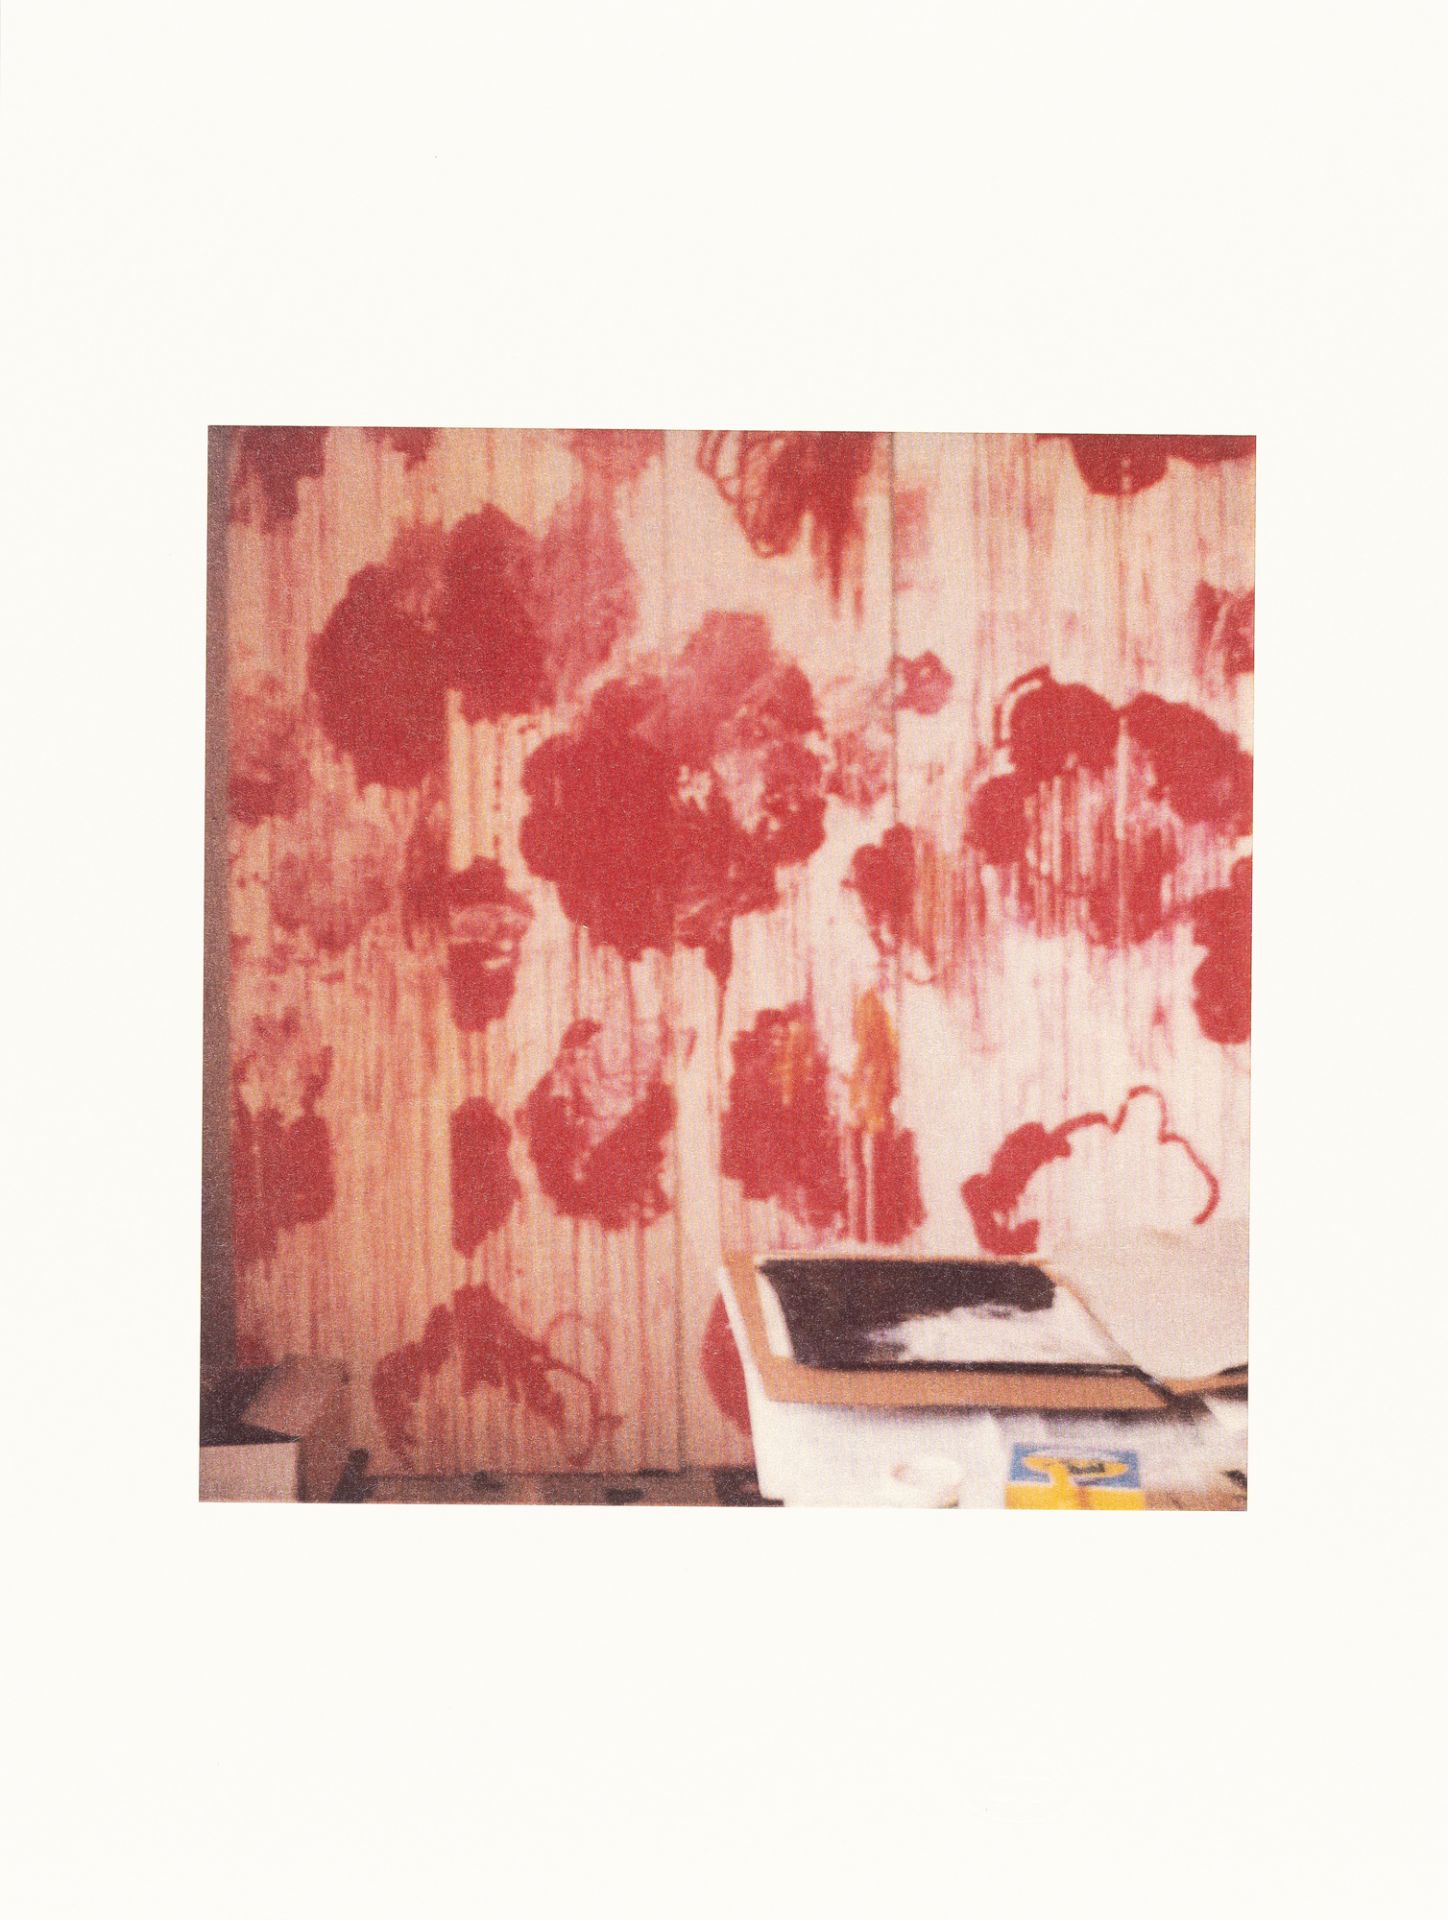 Cy Twombly – Unfinished Painting (Gaeta)